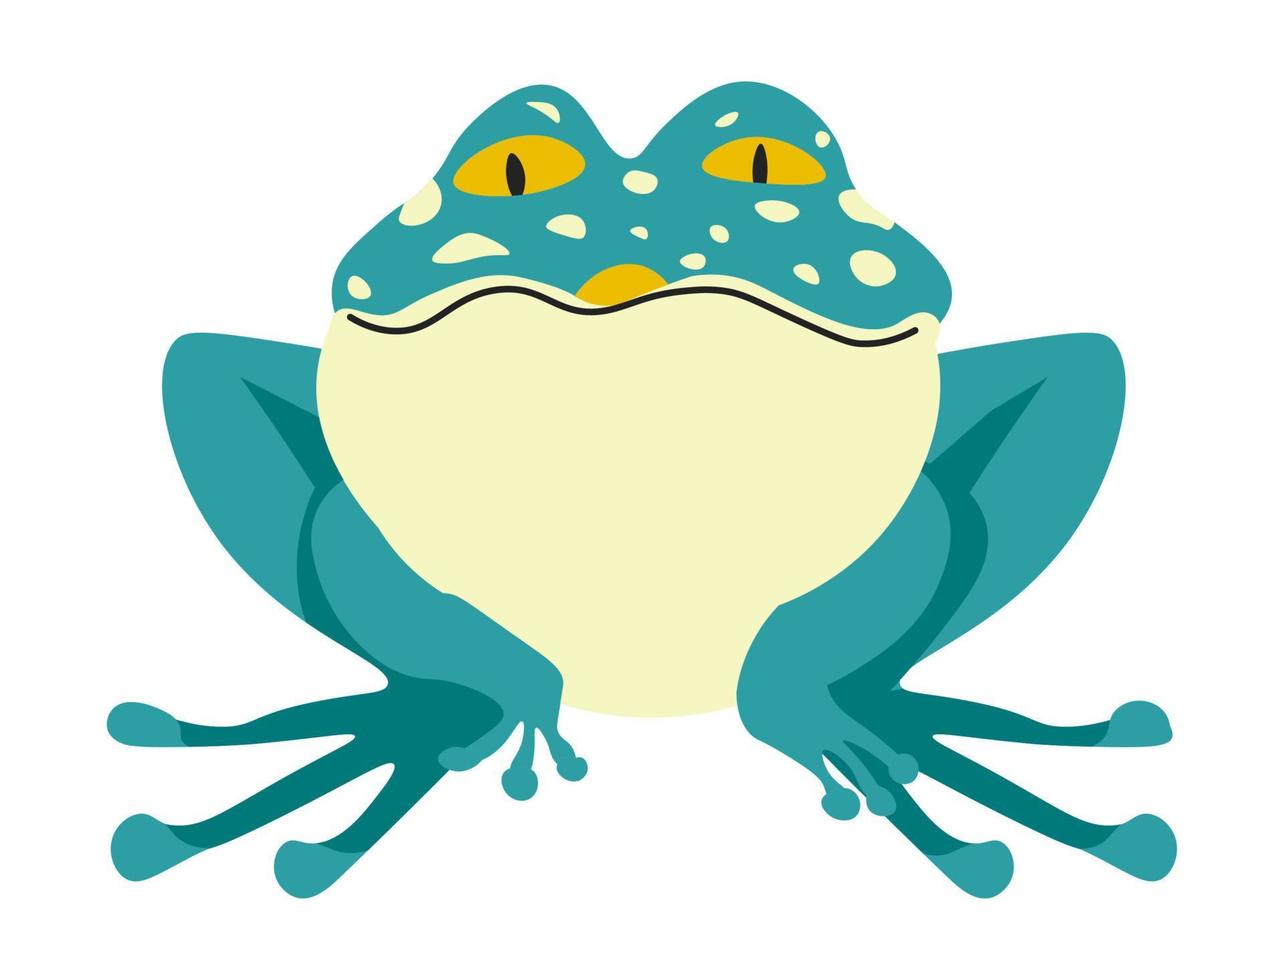 Toad amphibian animal, nature and wilderness frogs vector